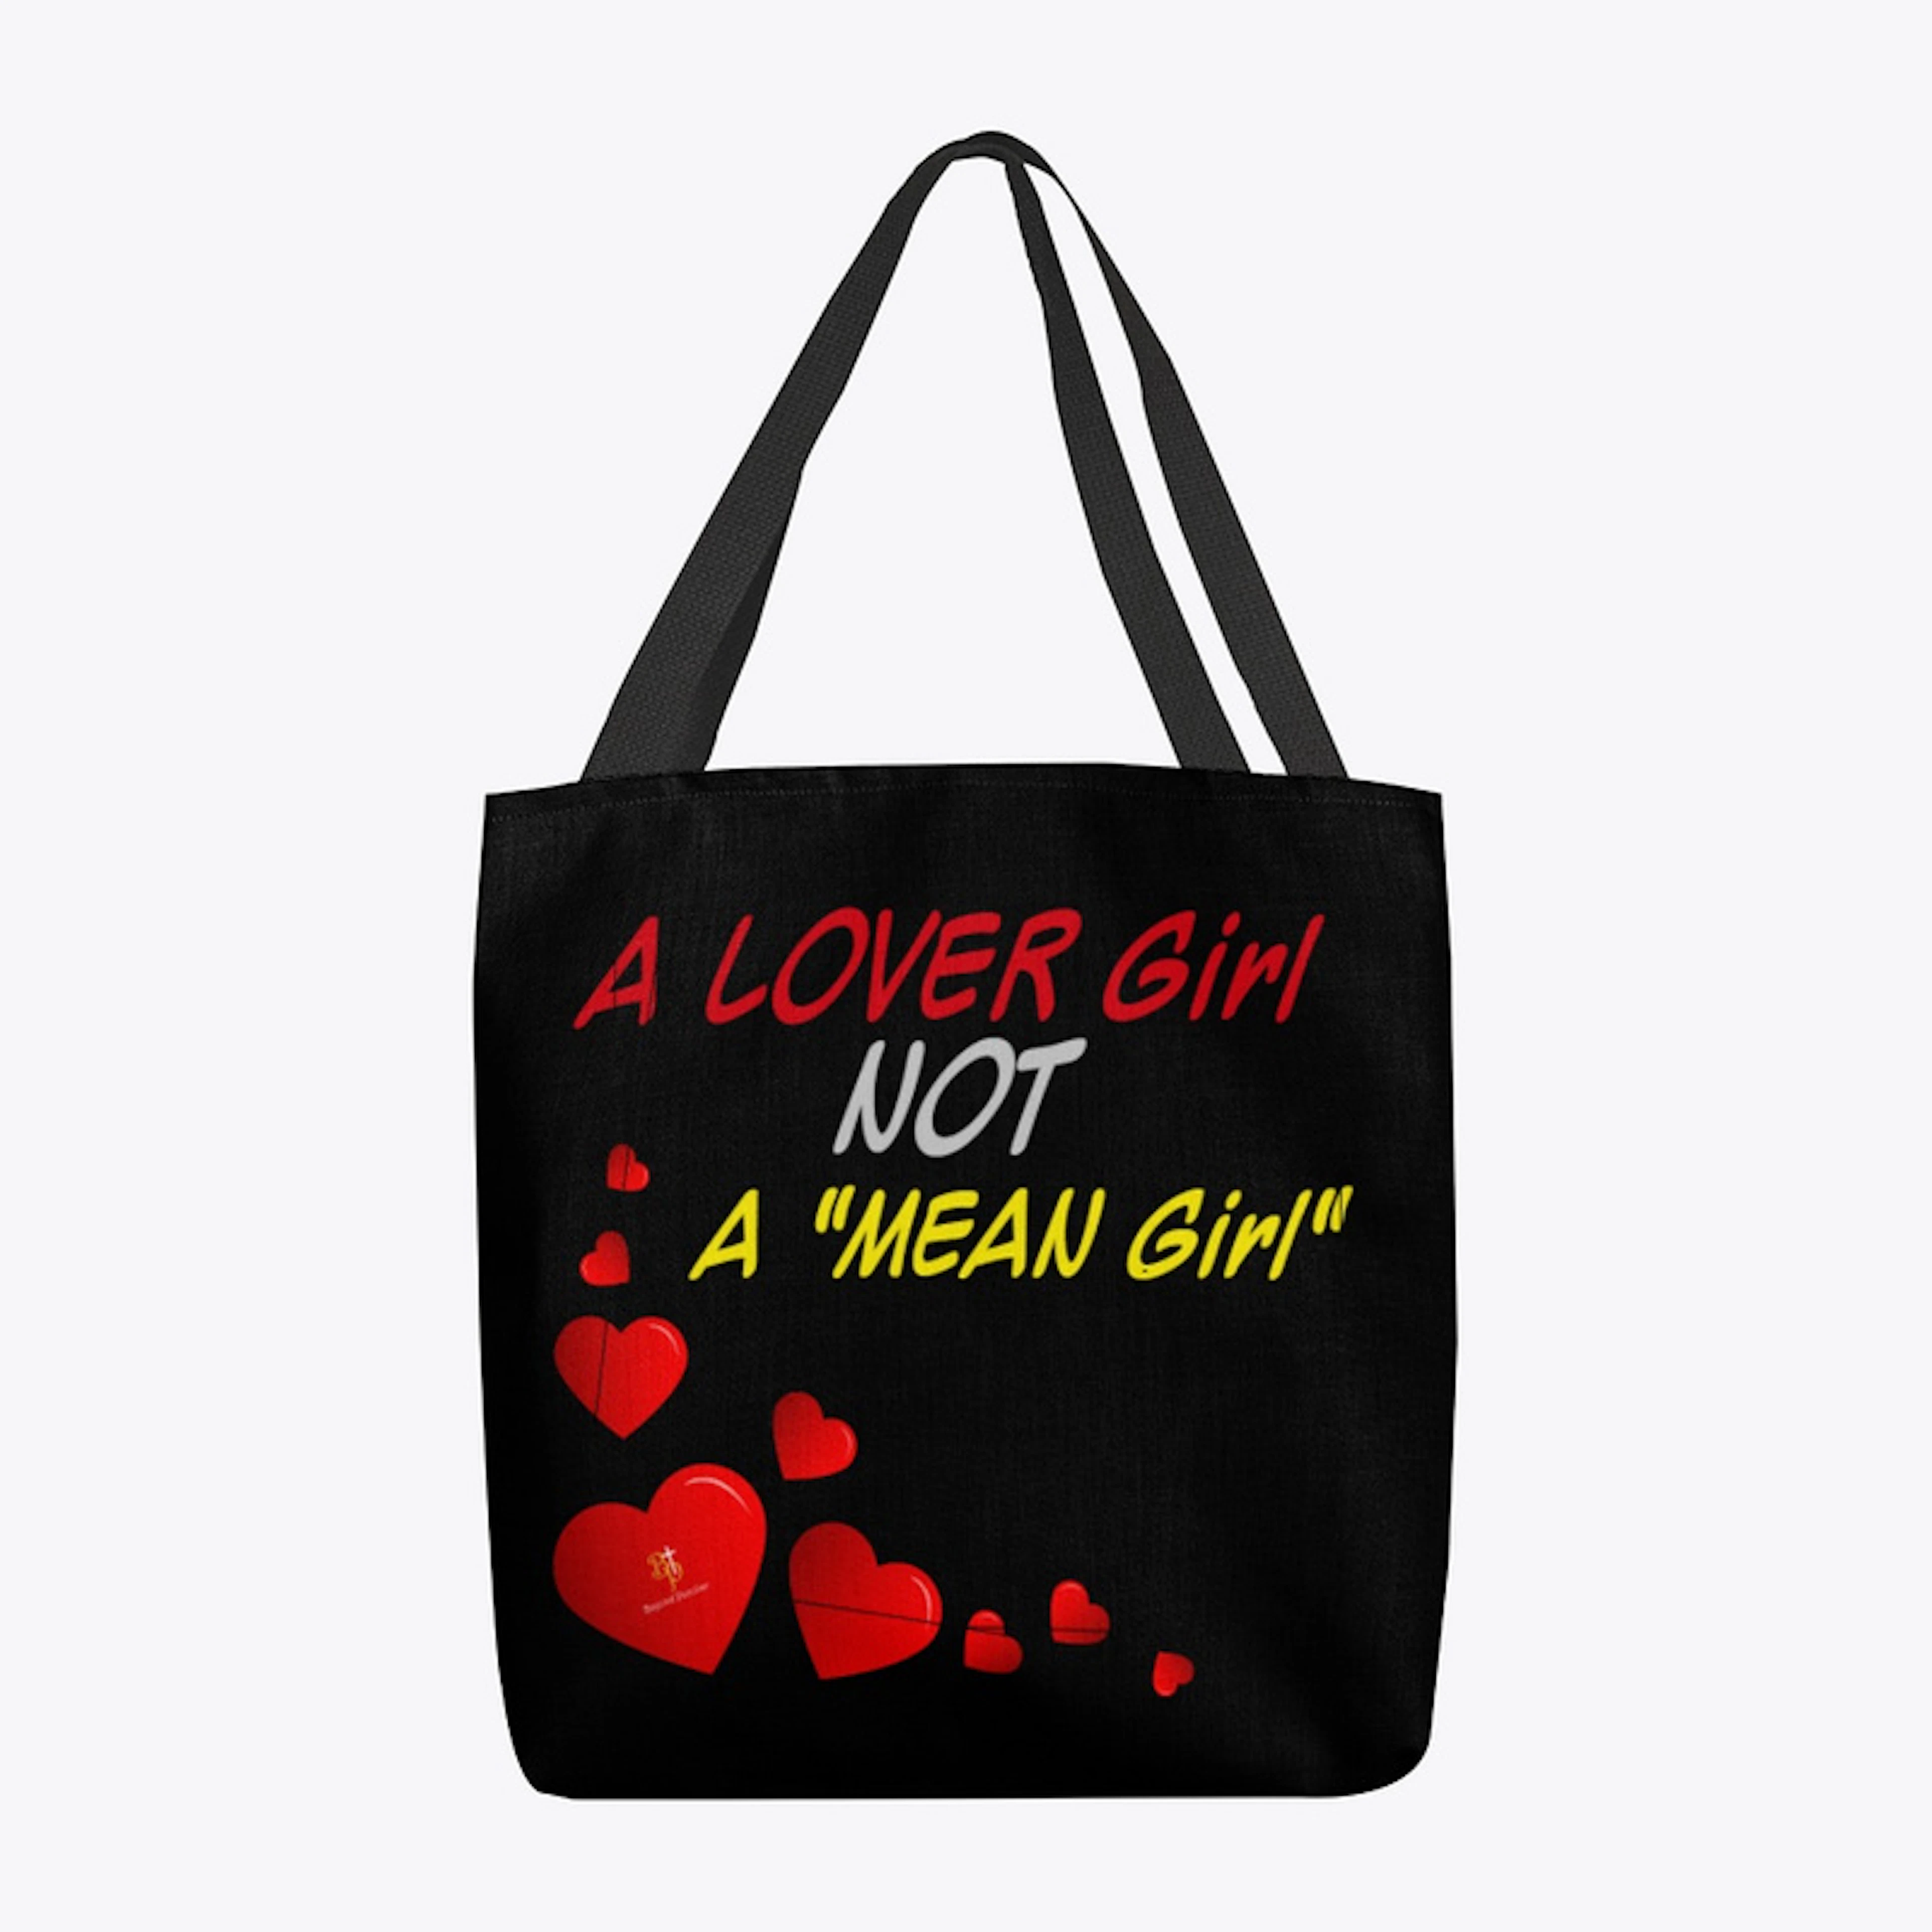 A Lover Girl BP Tote!